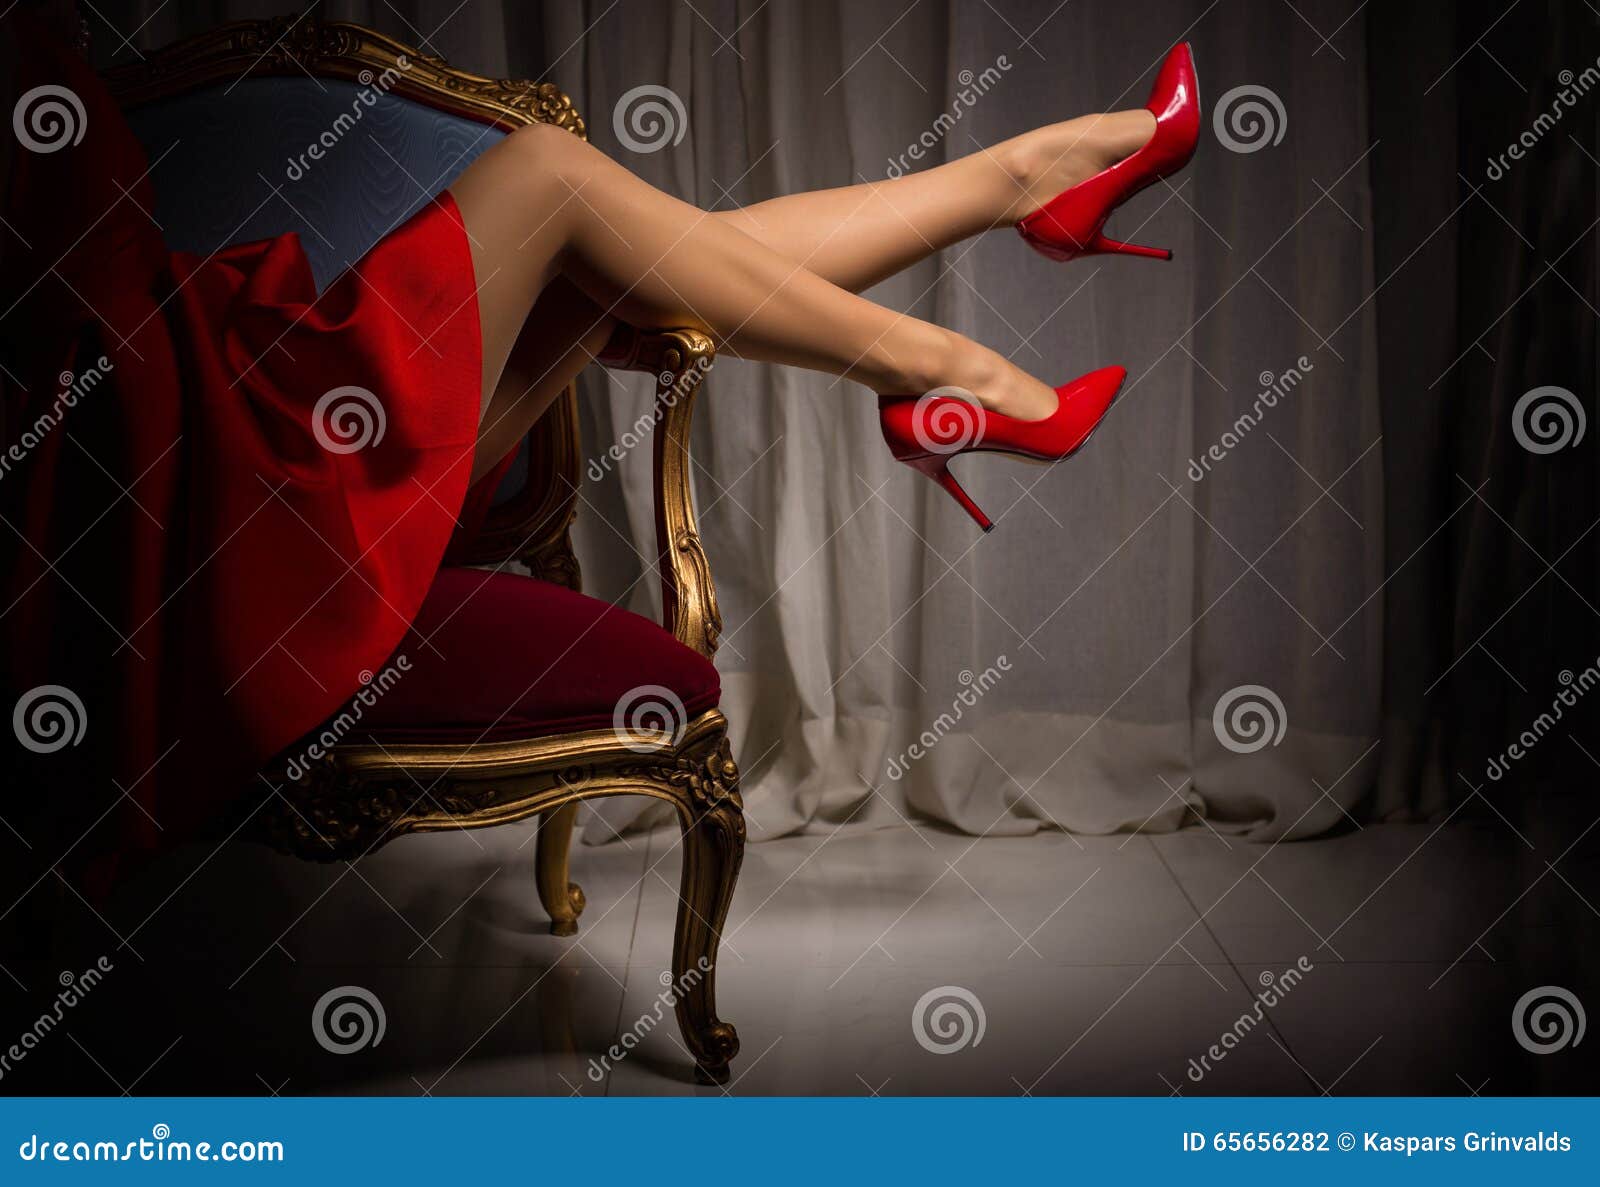 Womans Legs In Red High Heels Stock Photo Image Of Fashion